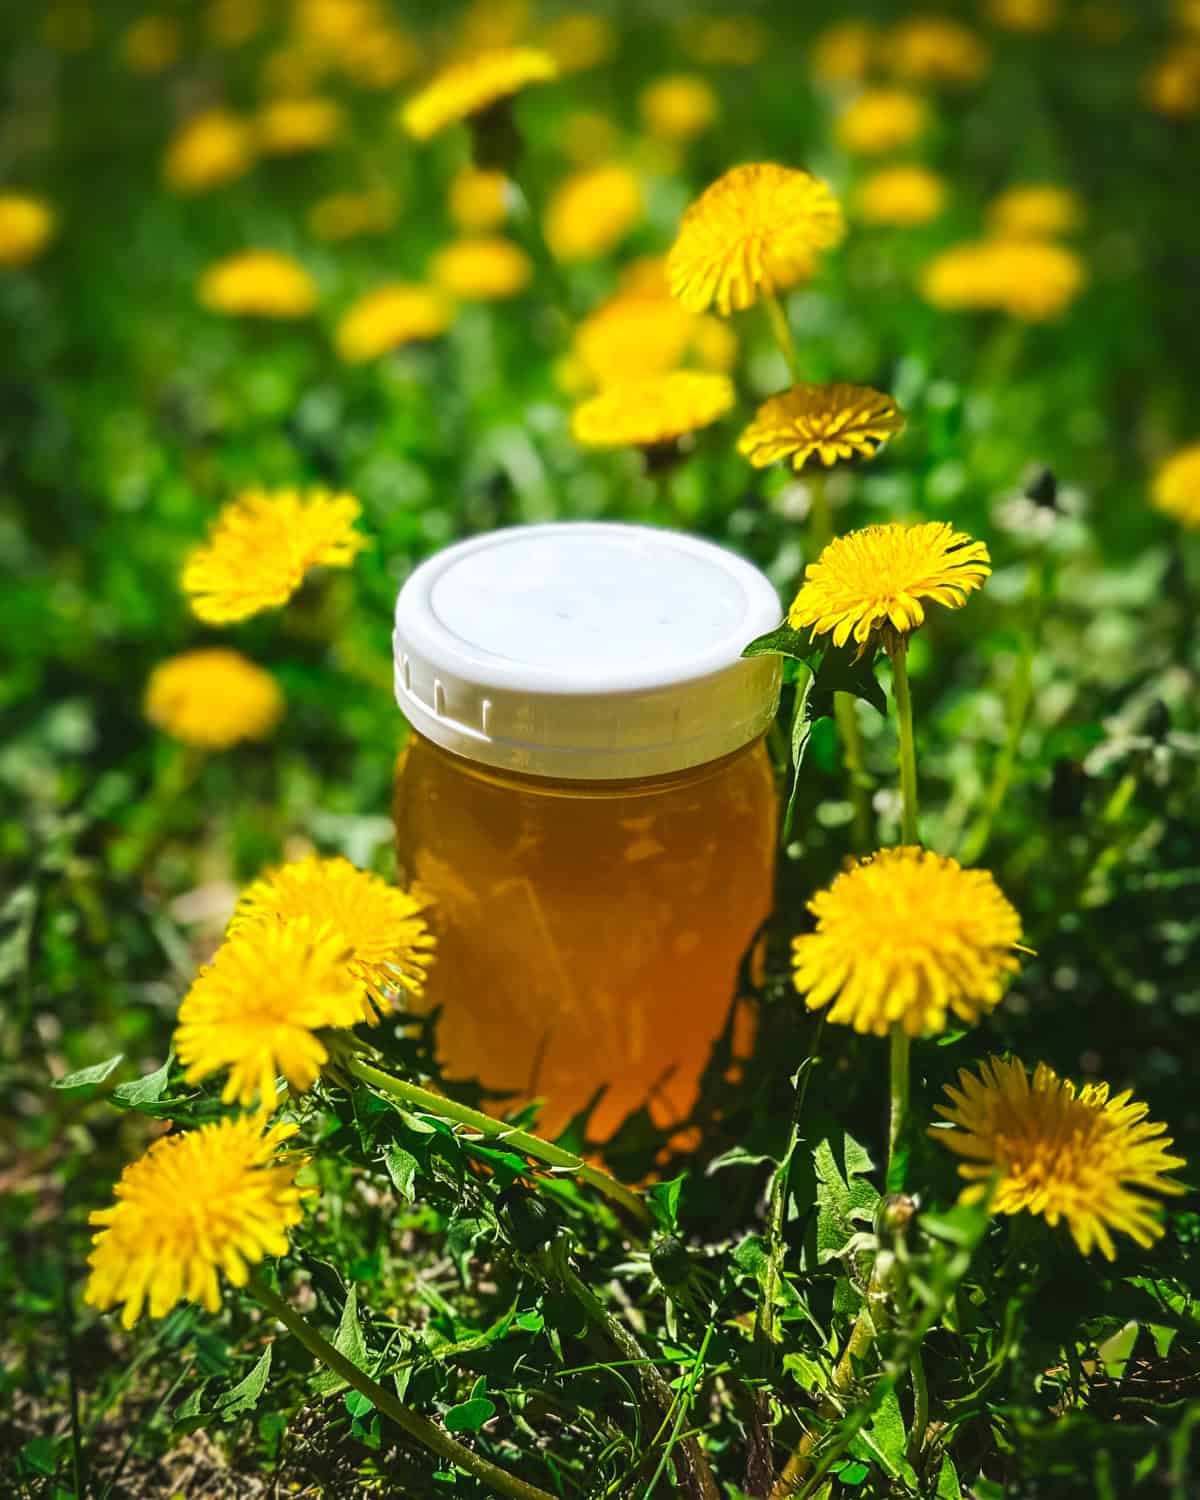 A jar of dandelion syrup with a white cap, in a field of dandelions. 